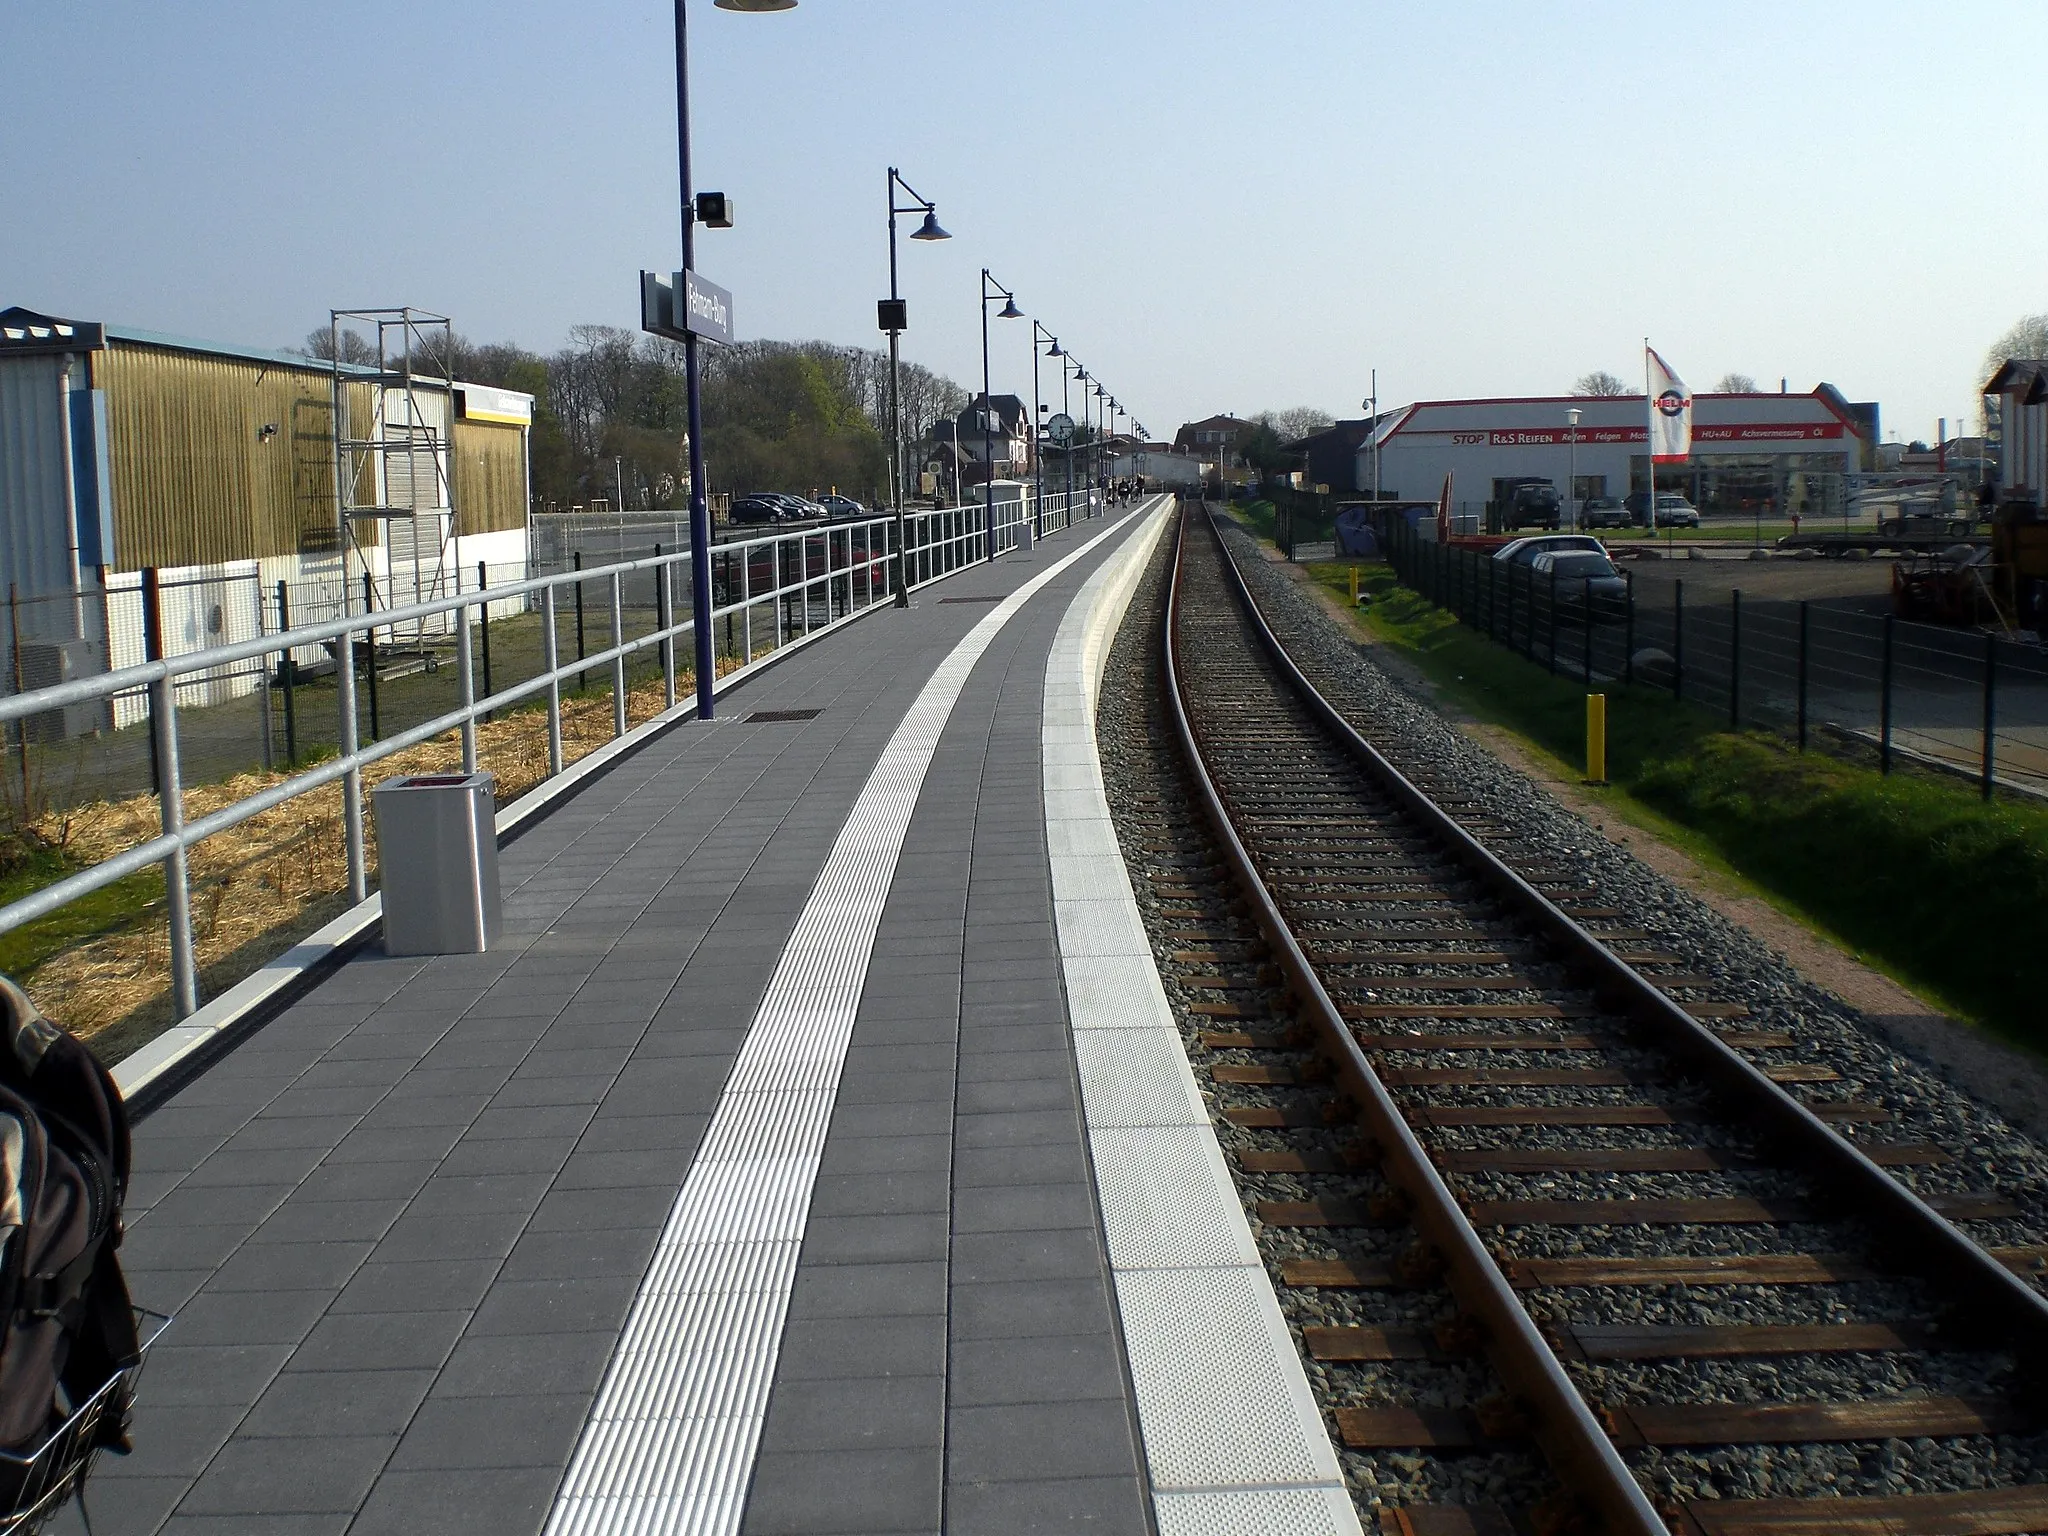 Photo showing: Burg train station, platform and track, on the island of Fehmarn, Germany. In the background left of the station clock you can perceive the old station building.